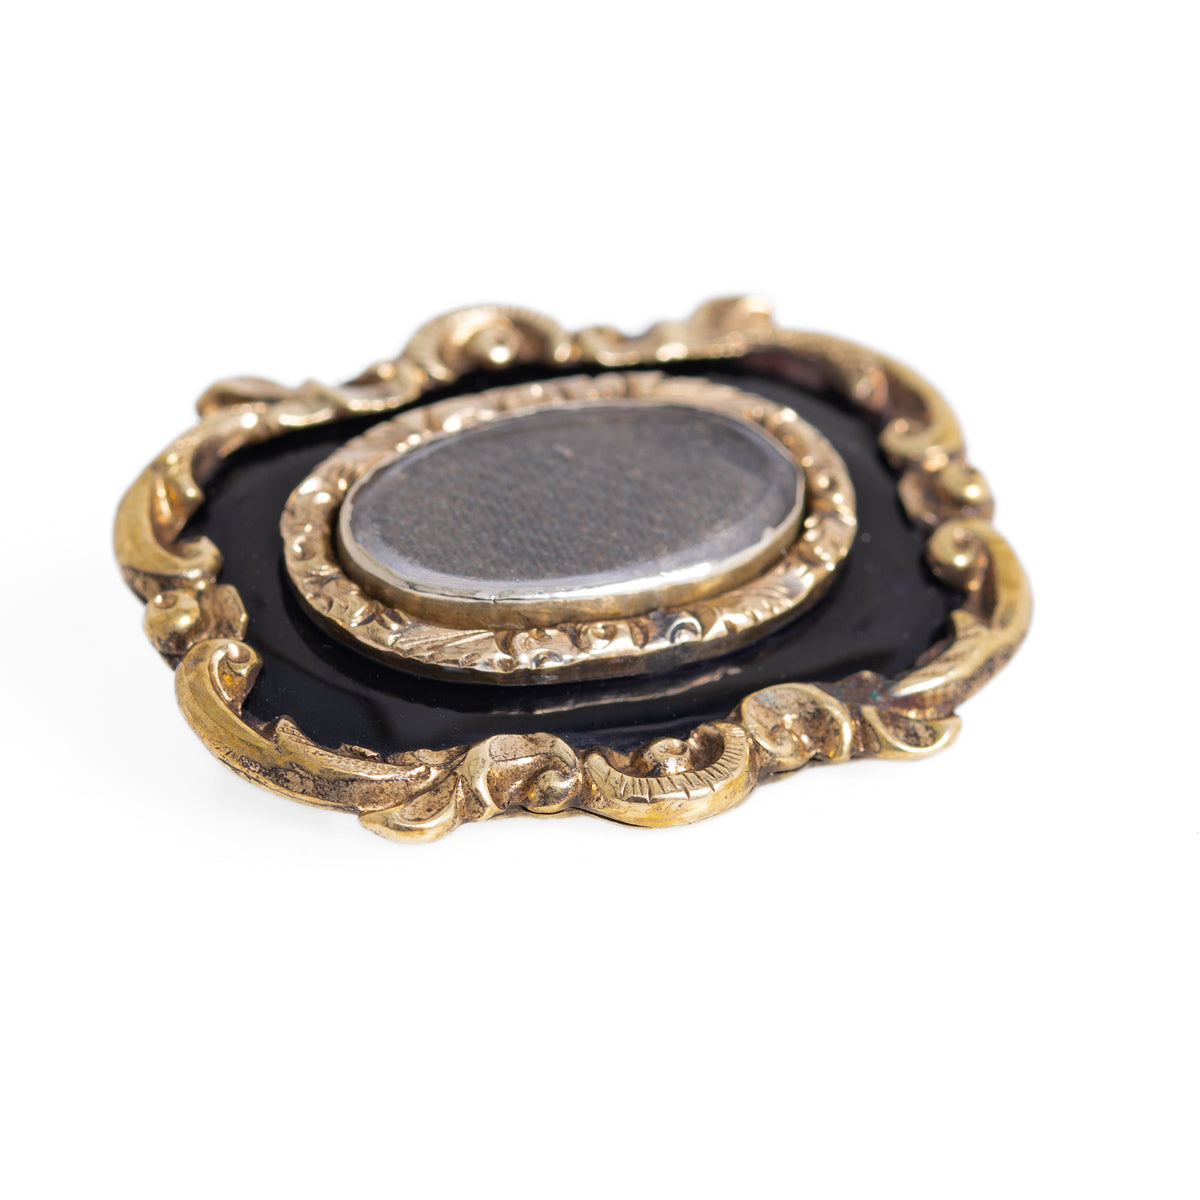 Antique Victorian Pinchbeck & Black Enamel Mourning Brooch With Woven Hair (A1213)